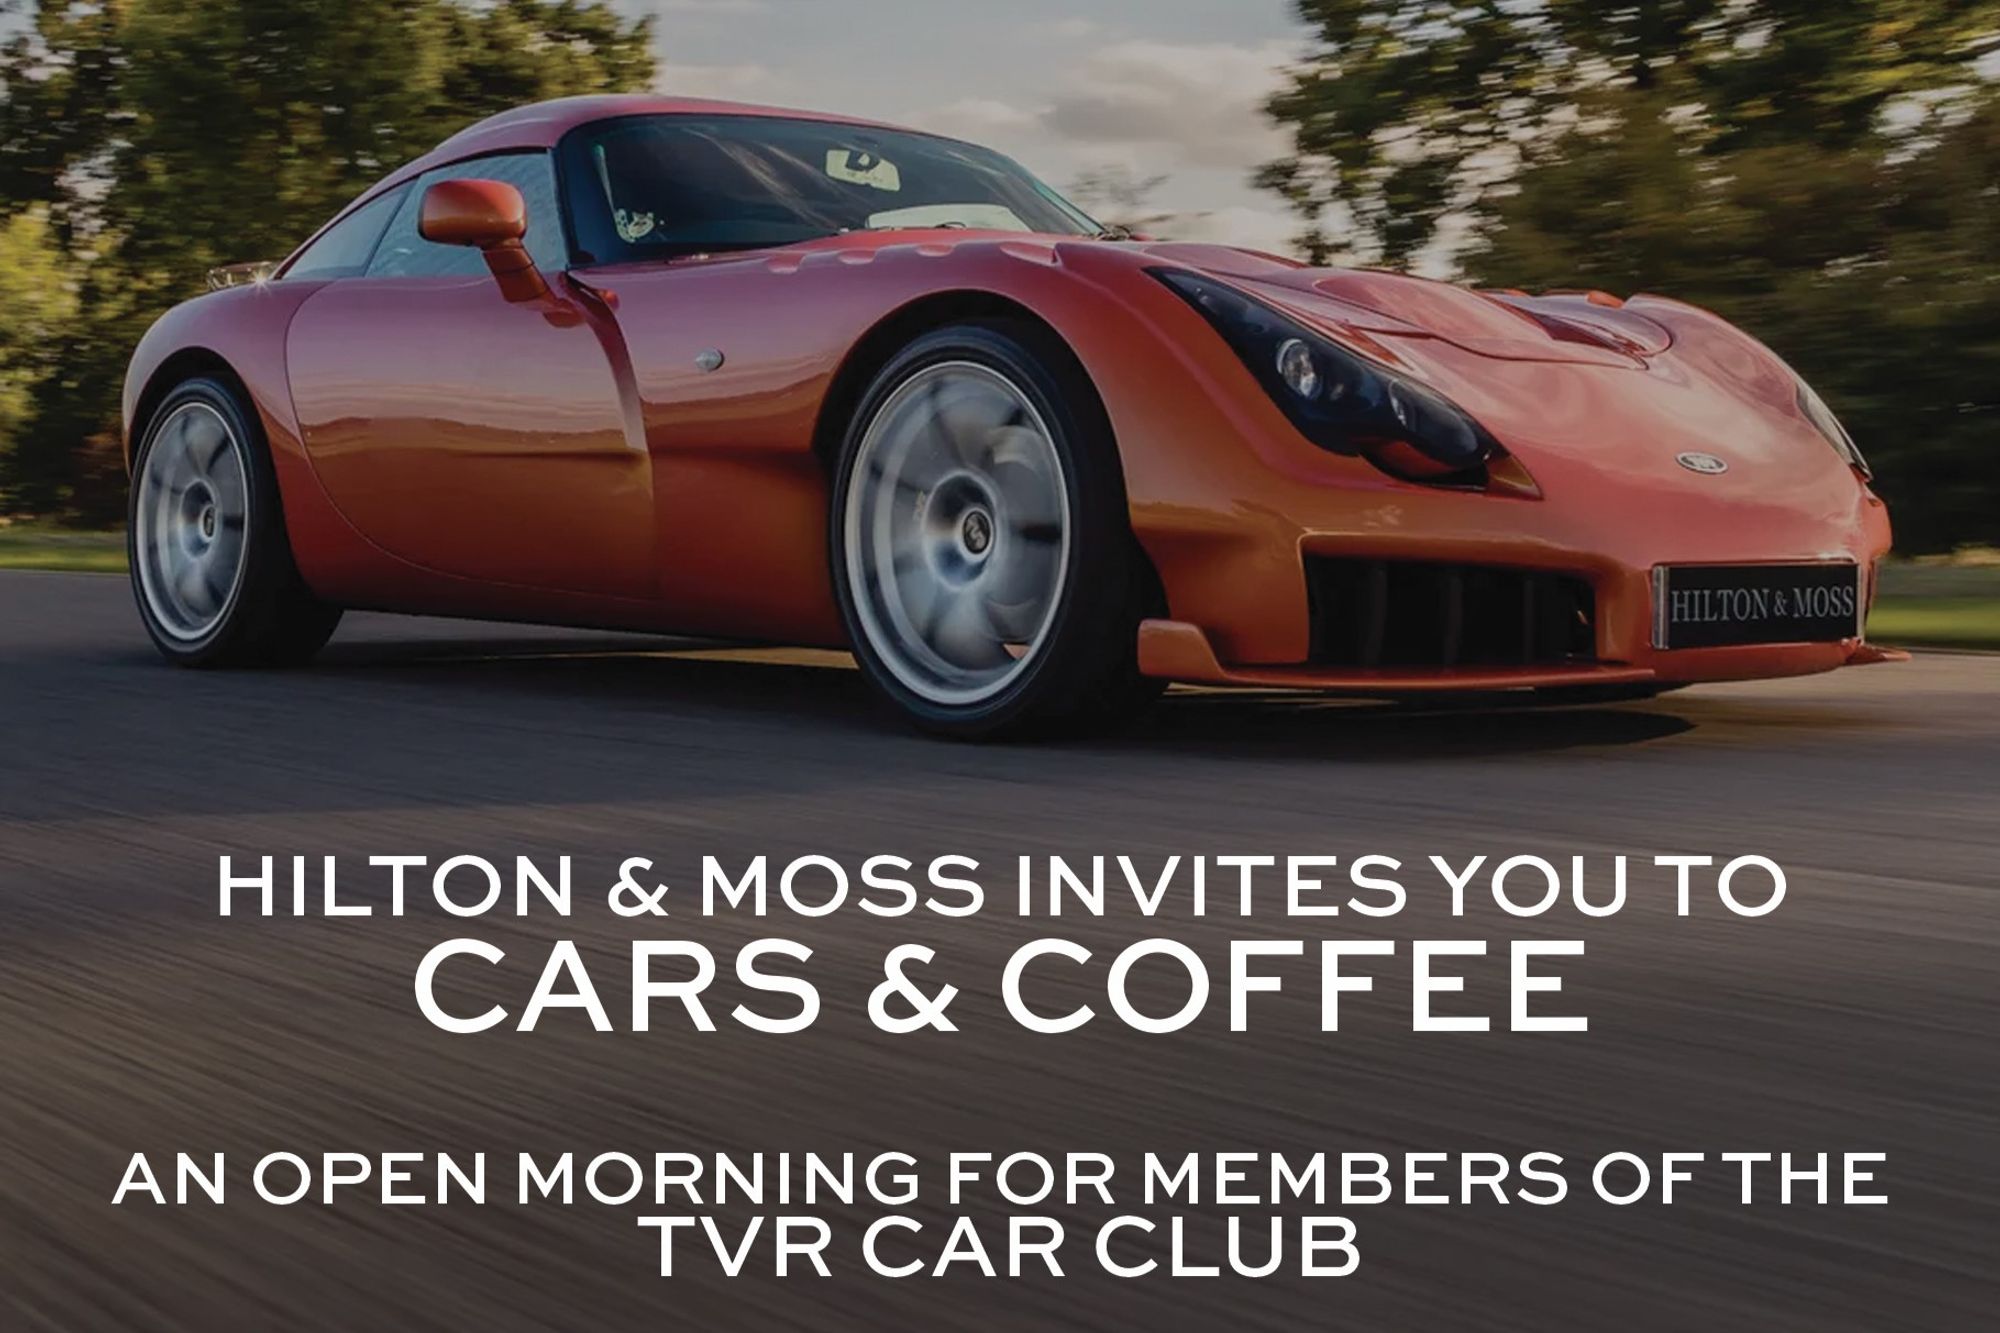 TVR Car Club Open Morning at Hilton & Moss